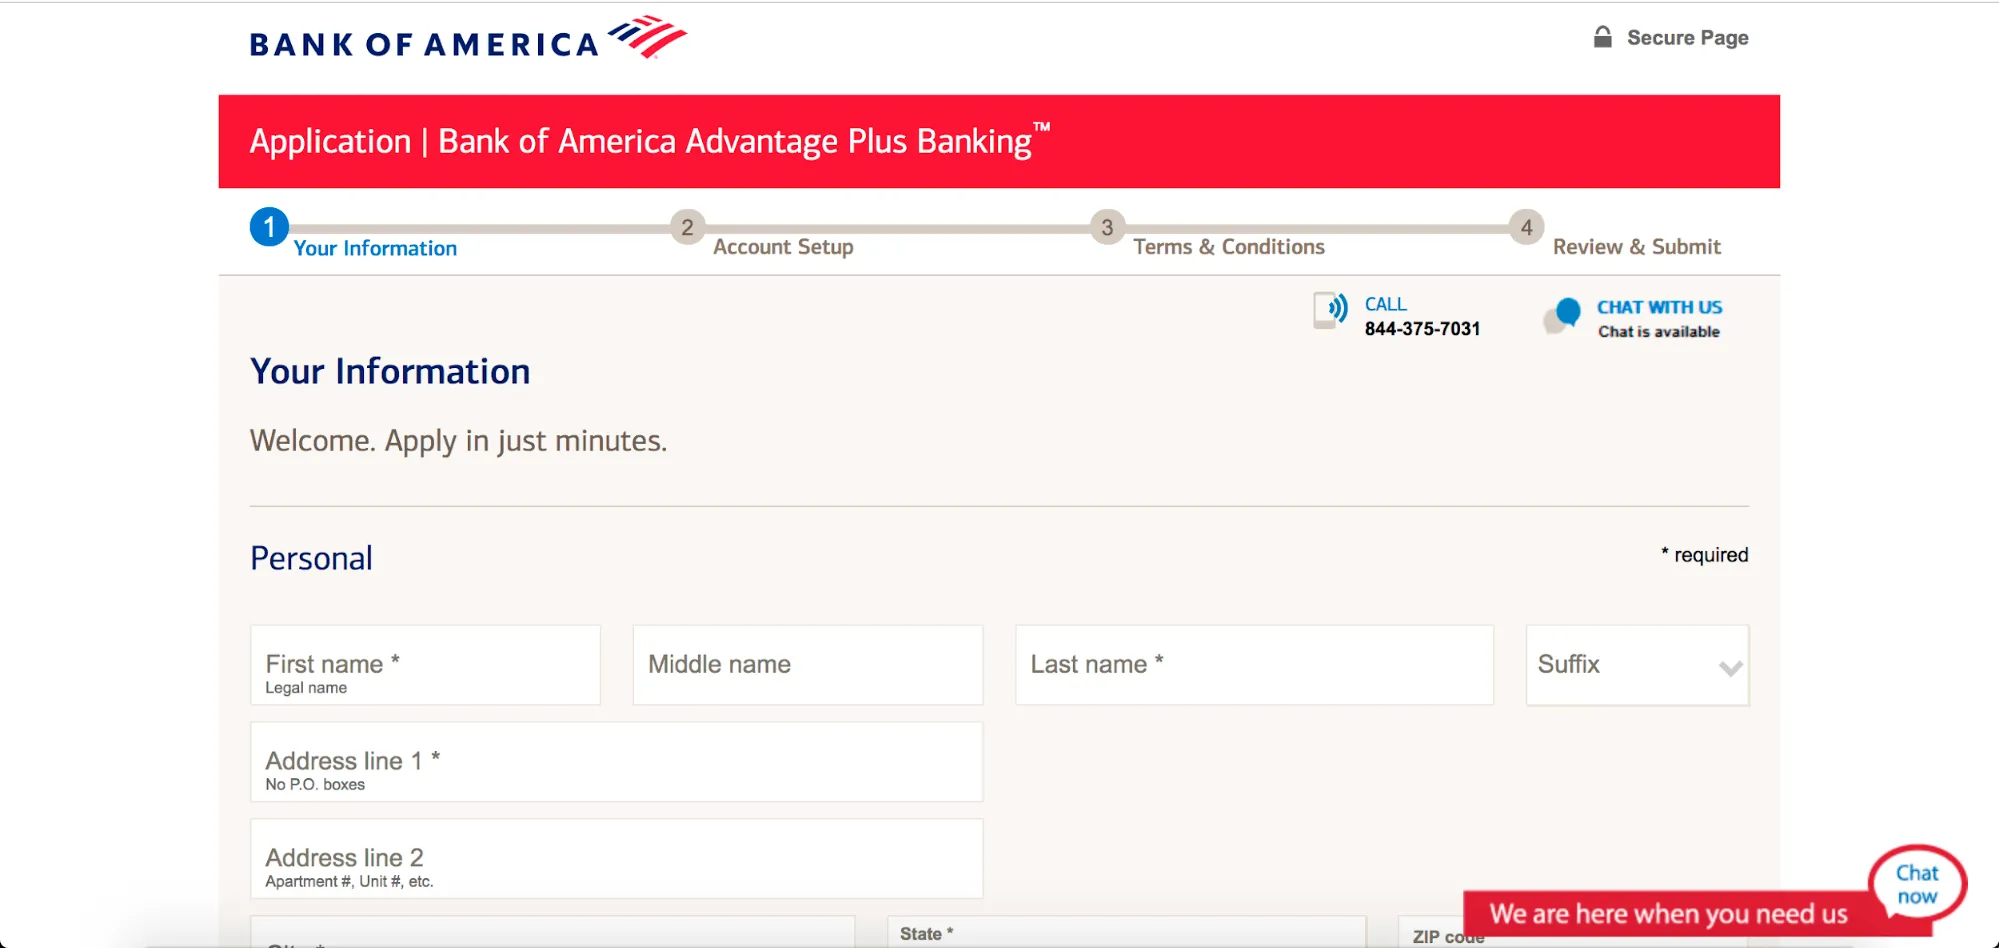 bank of america address for wire transfers